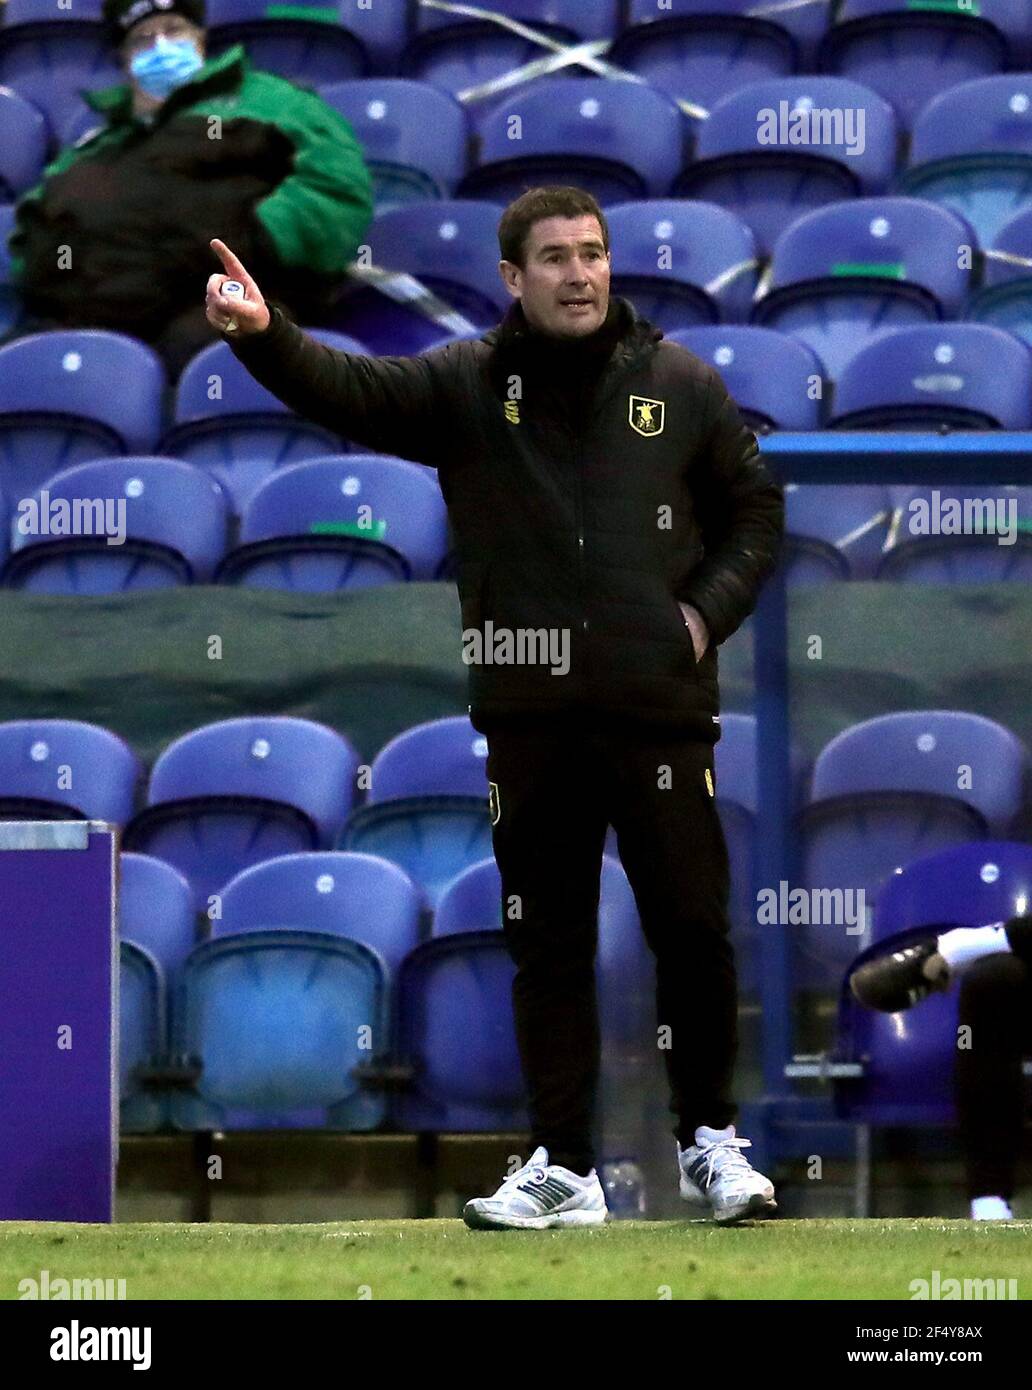 Mansfield Town manager Nigel Clough gestures on the touchline during the Sky Bet League Two match at the One Call Stadium, Mansfield. Picture date: Tuesday March 23, 2021. Stock Photo